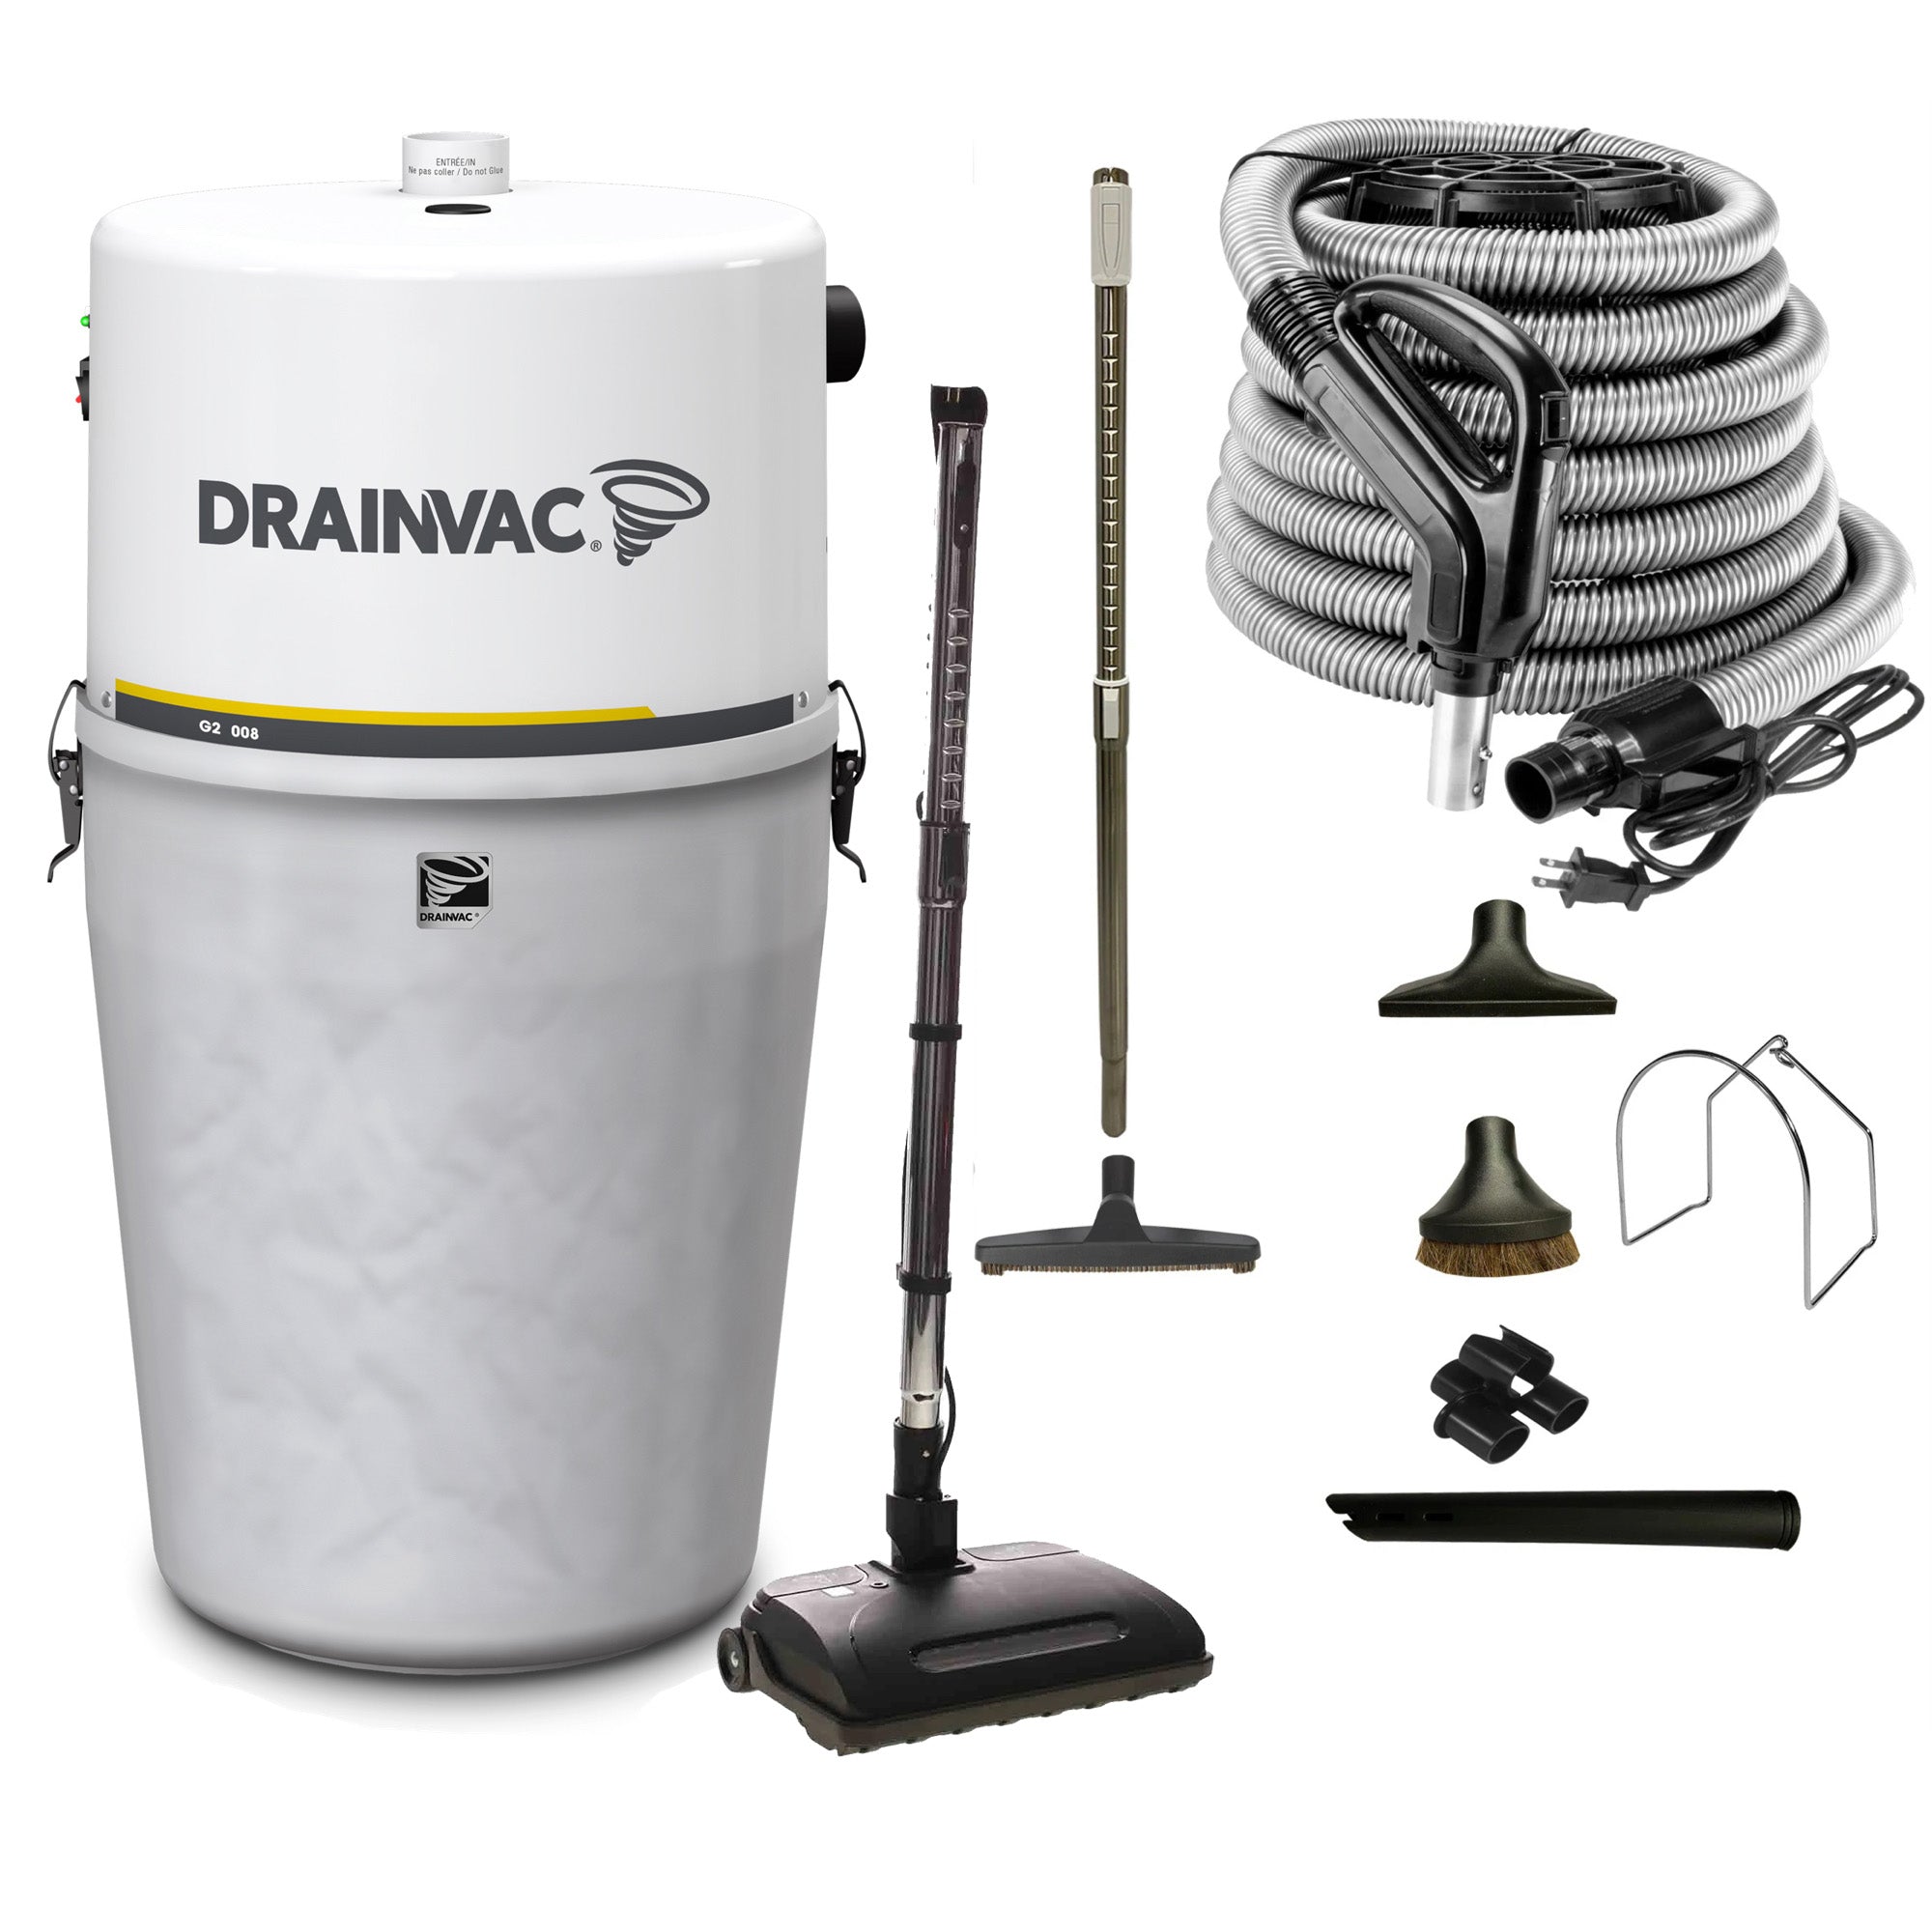 DrainVac G2-008 Central Vacuum Cleaner | 800 Air Watts Motor | Airstream Electric Package